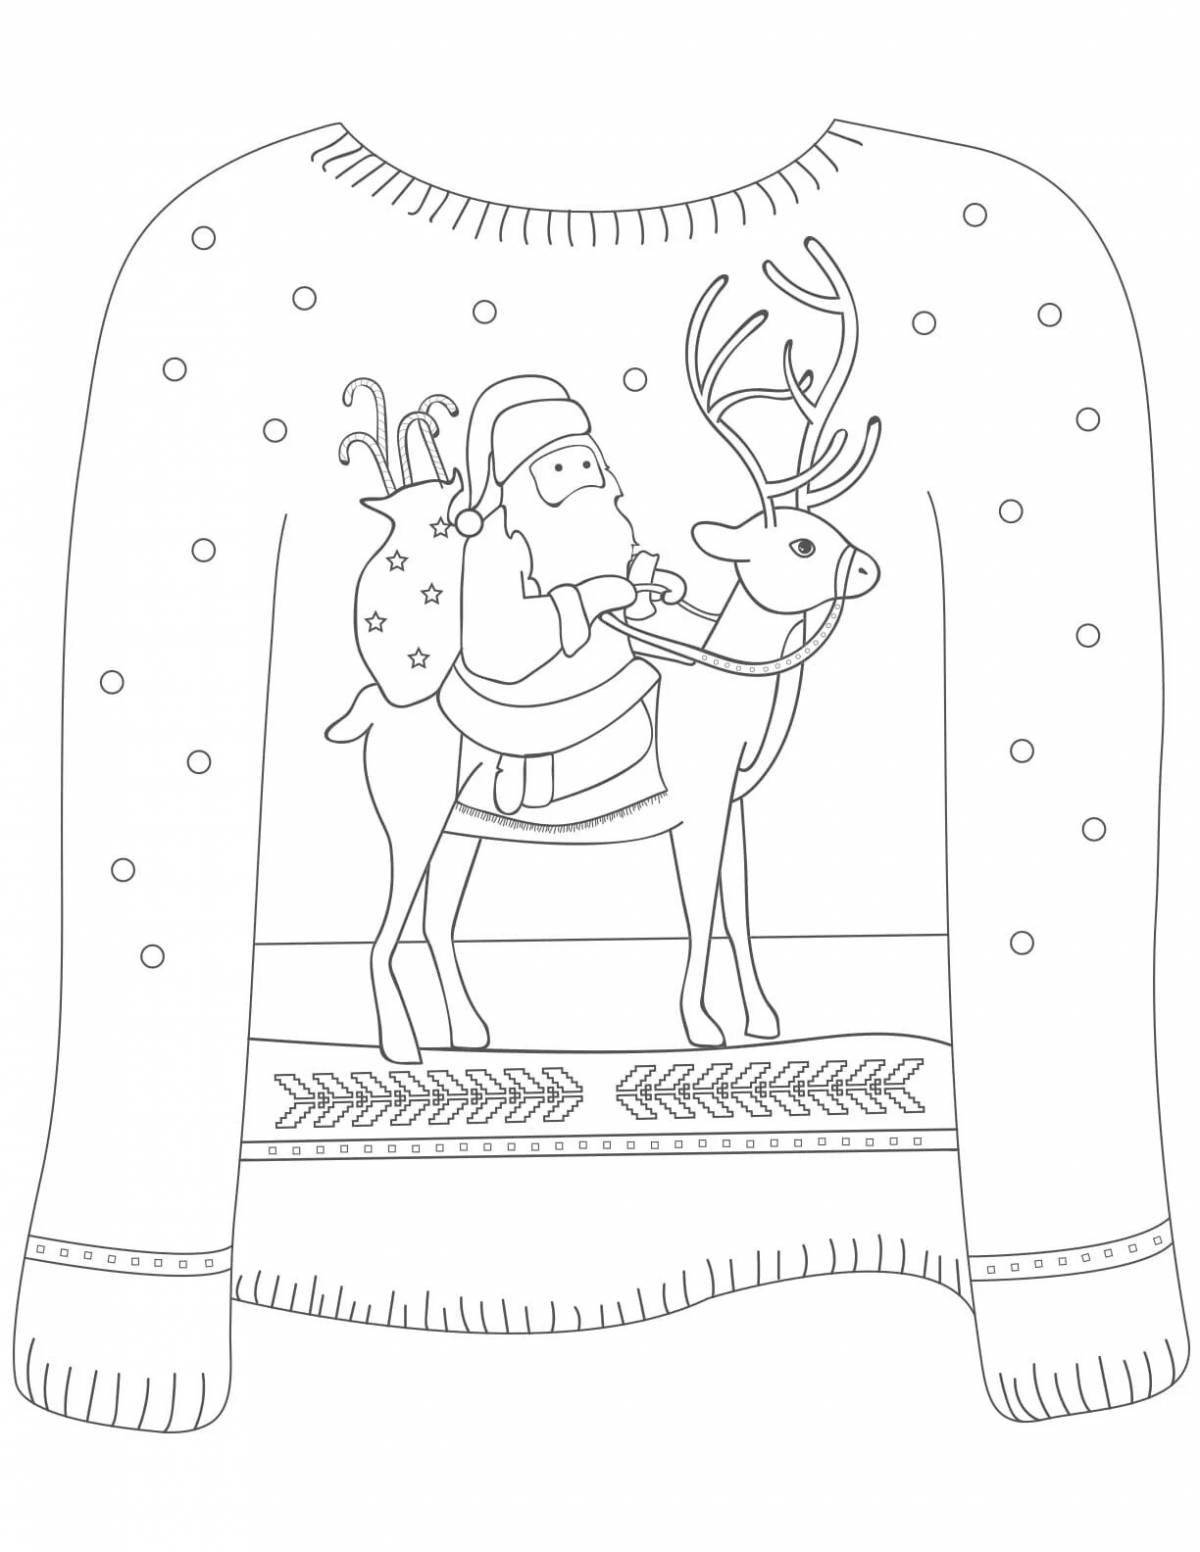 Fascinating coloring Christmas sweater